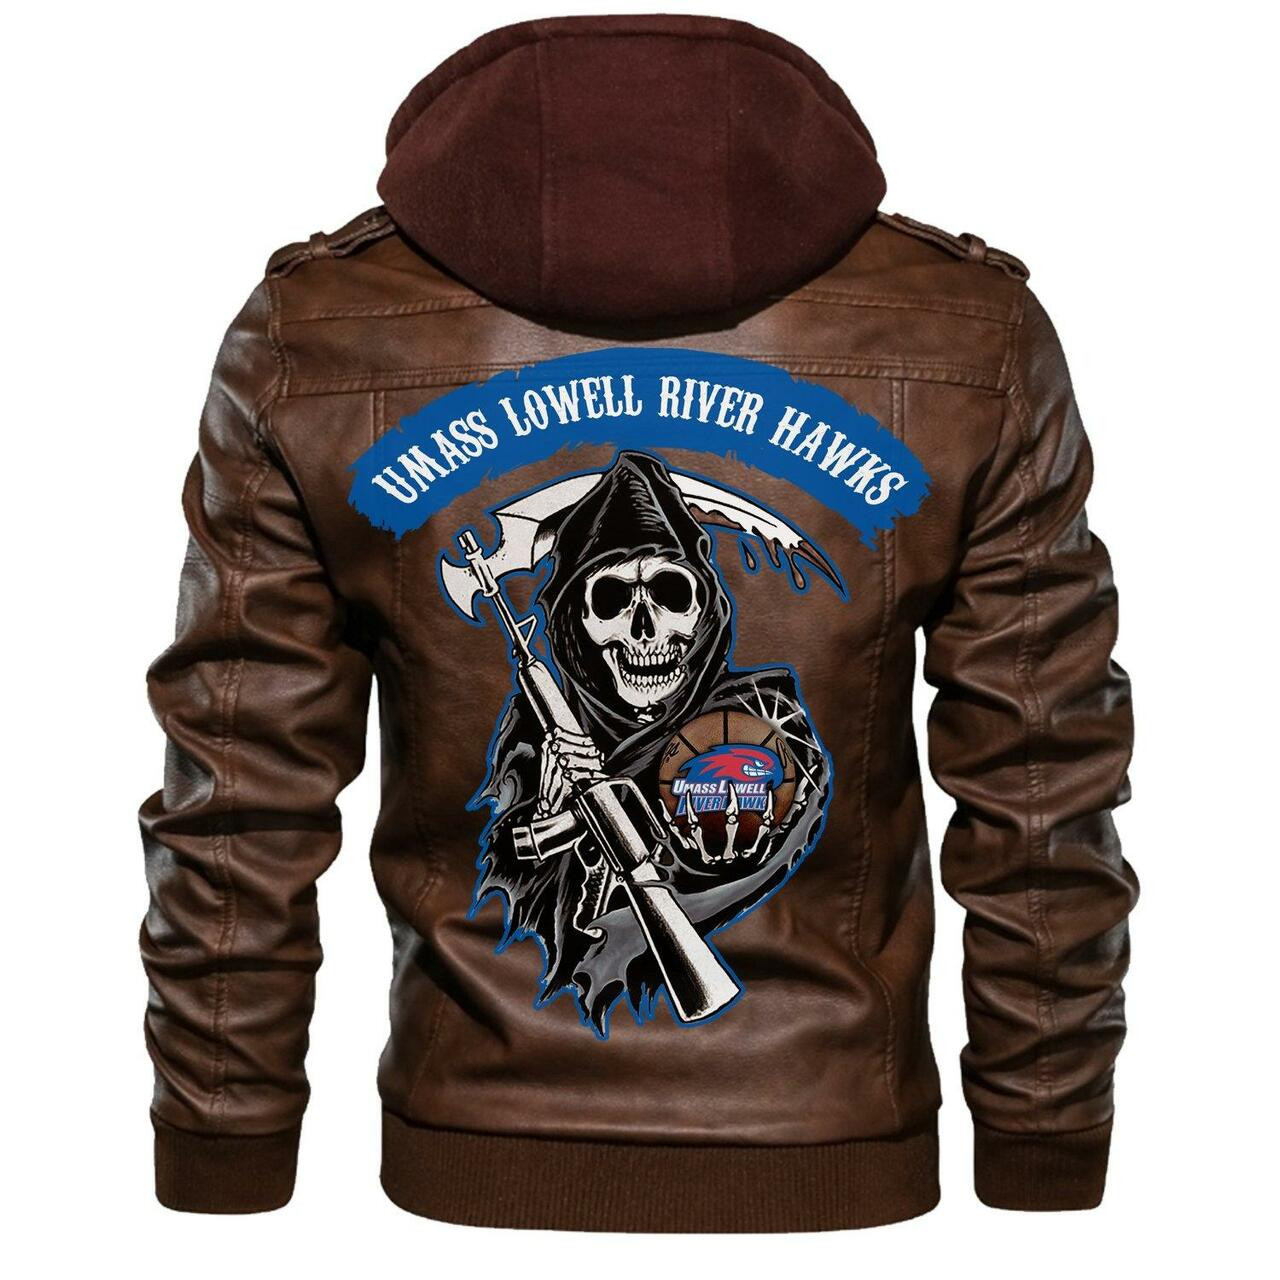 Our store has all of the latest leather jacket 105